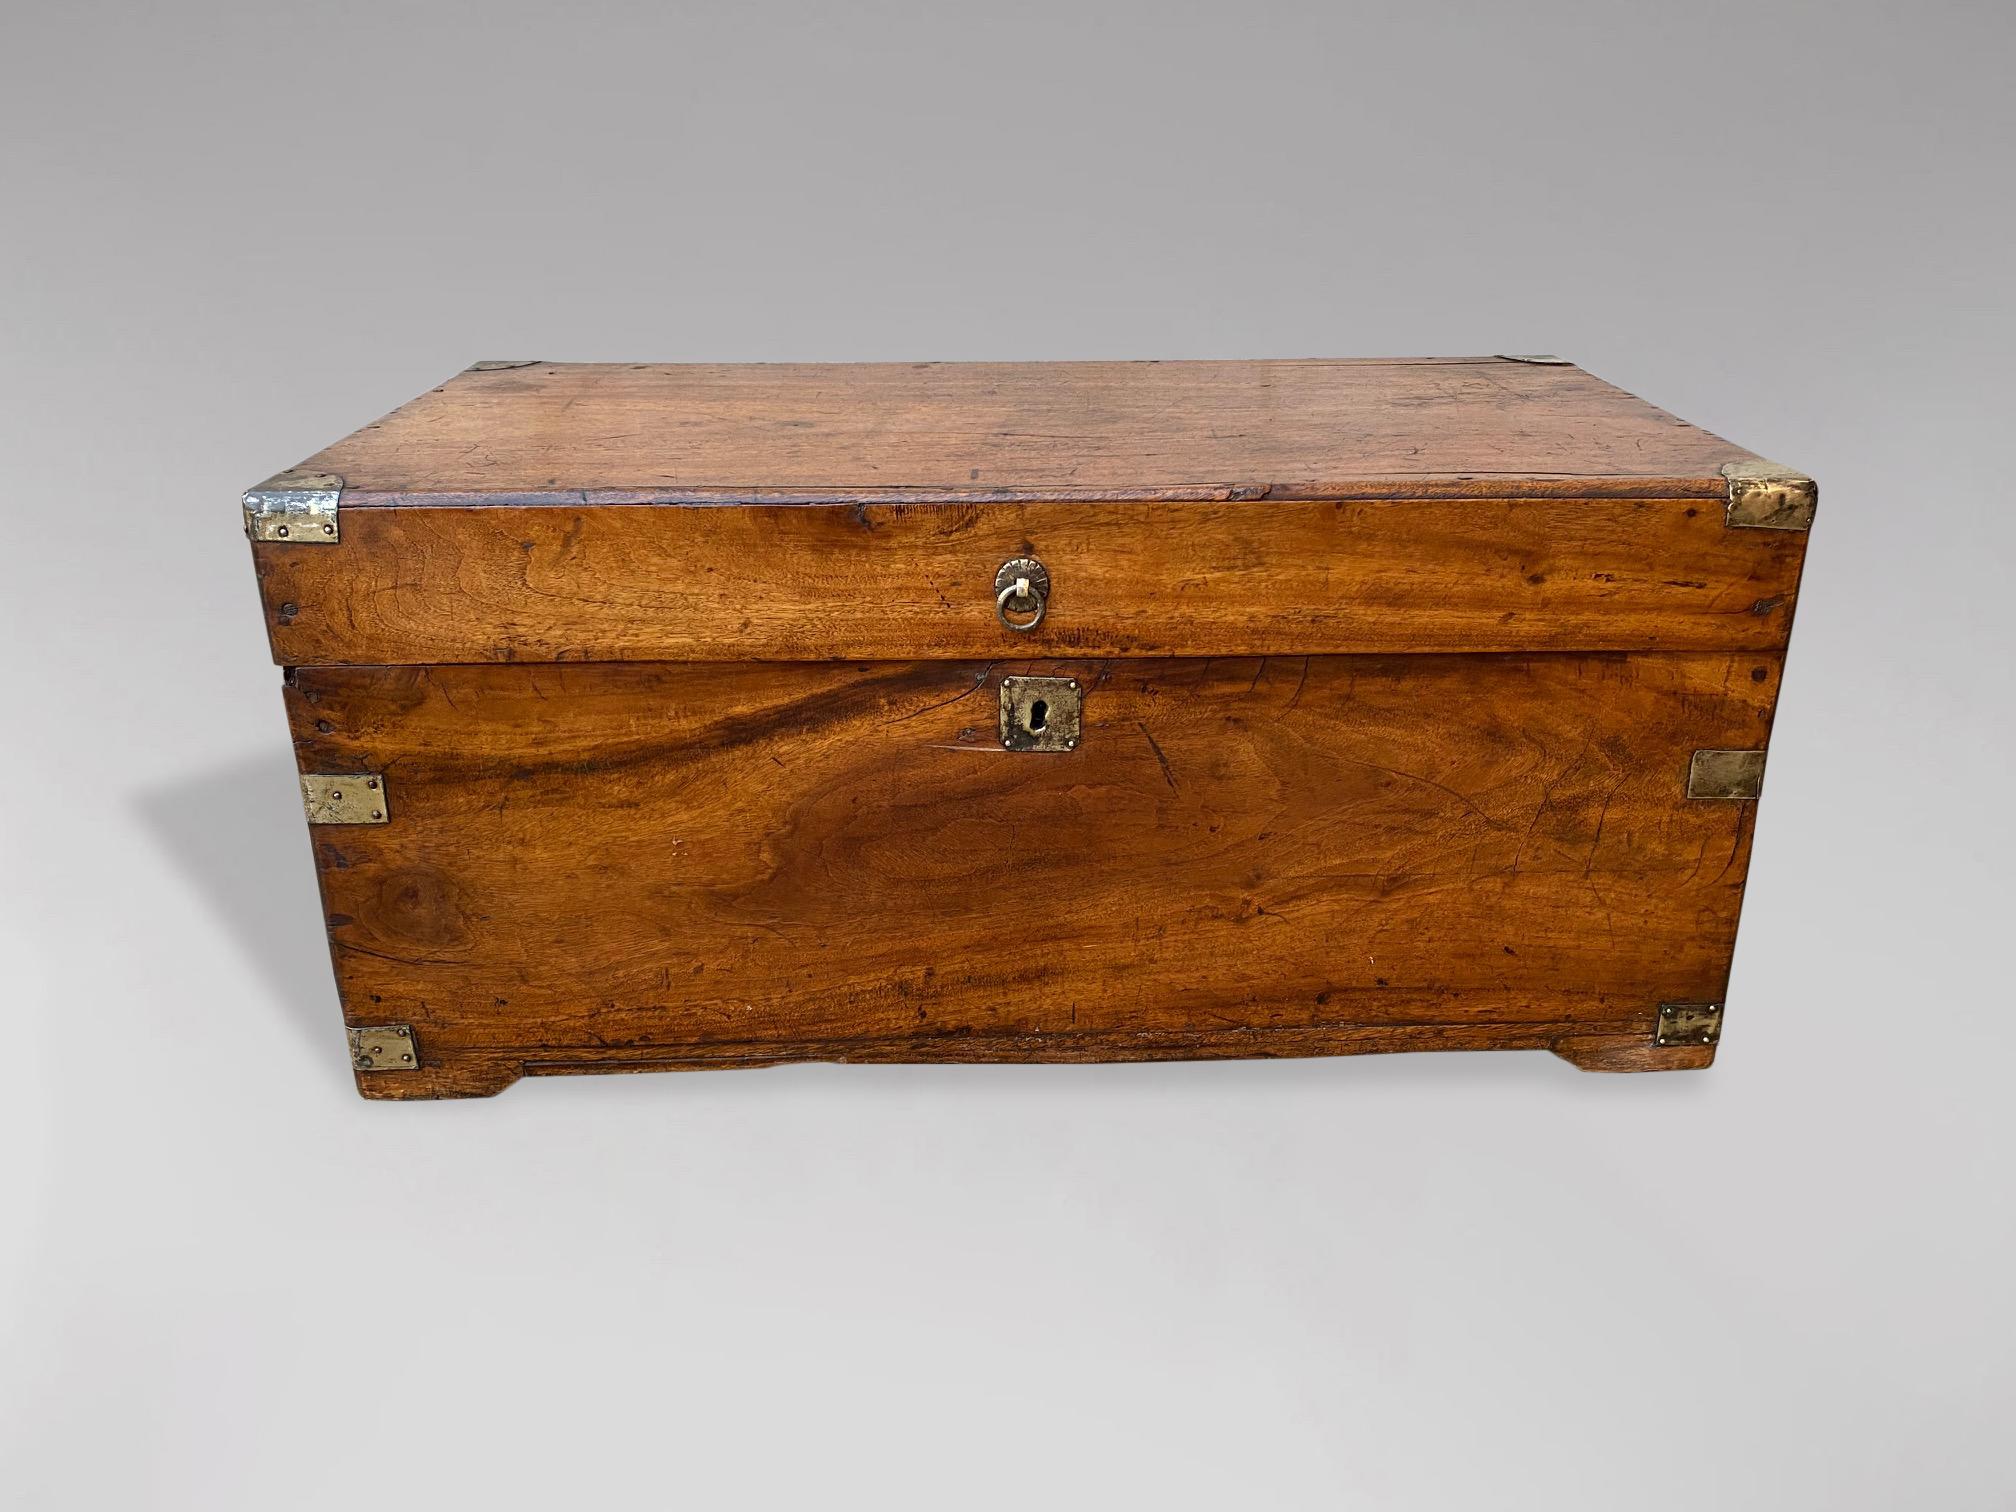 British Colonial 19th Century Small Camphor Wood Chest